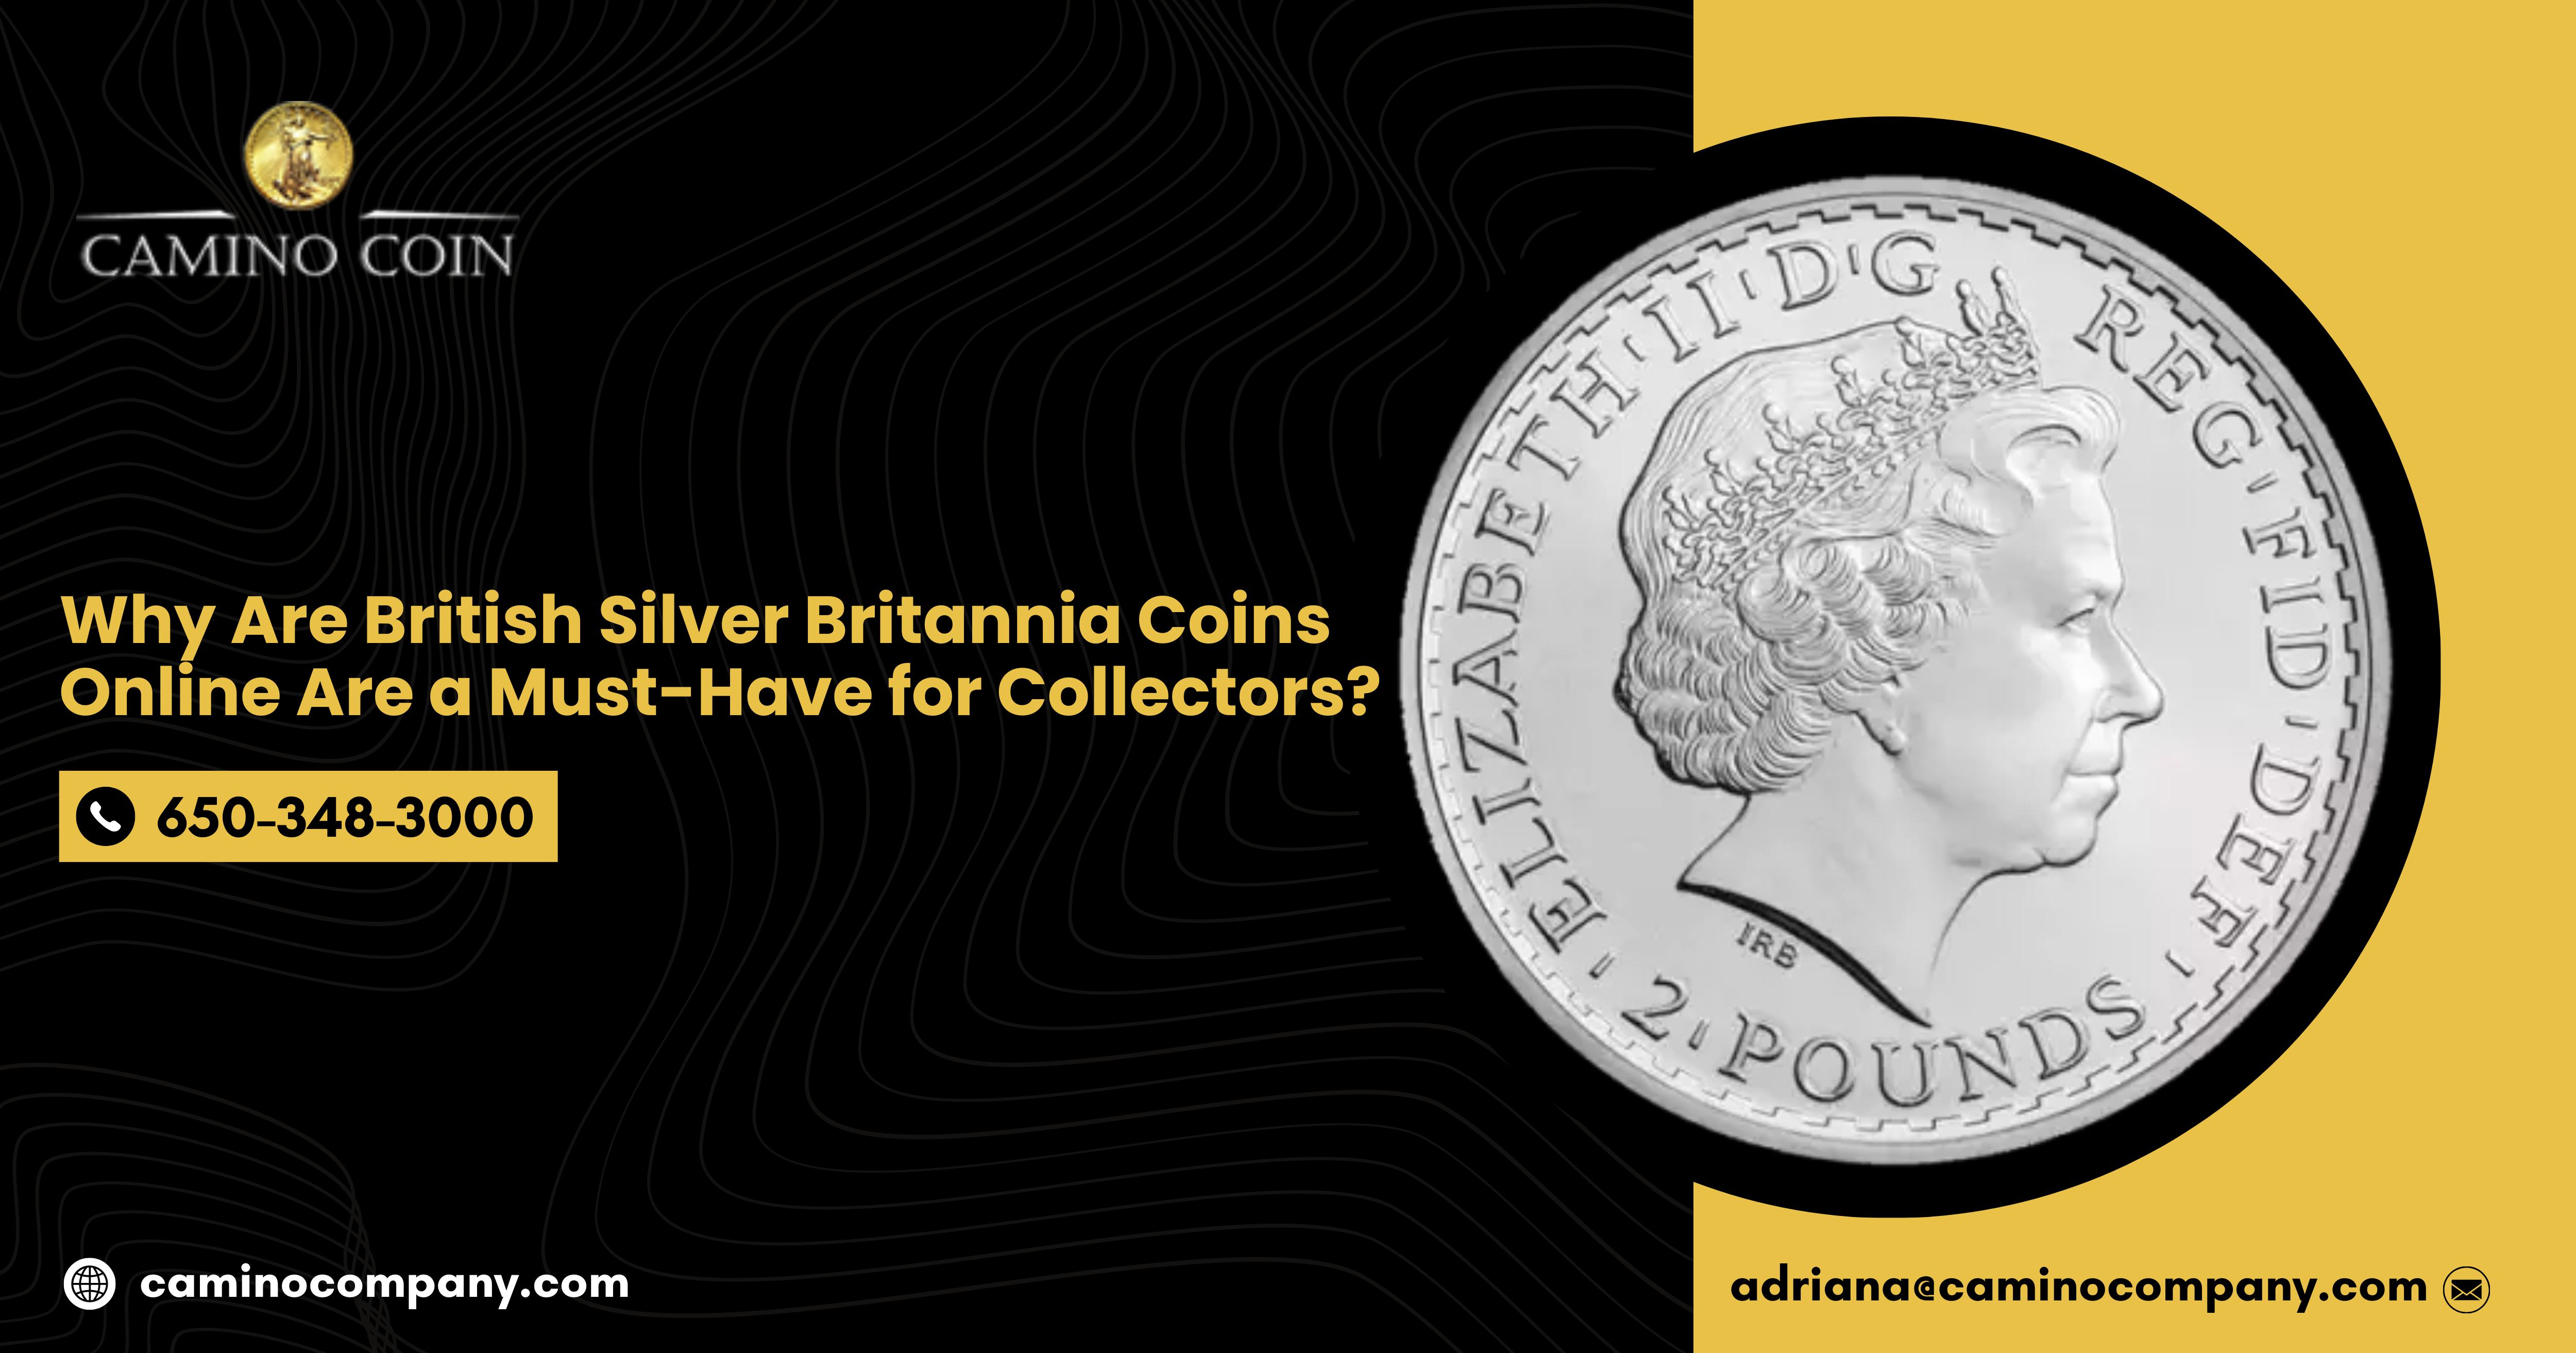 Why Are British Silver Britannia Coins Online Are a Must-Have for Collectors?